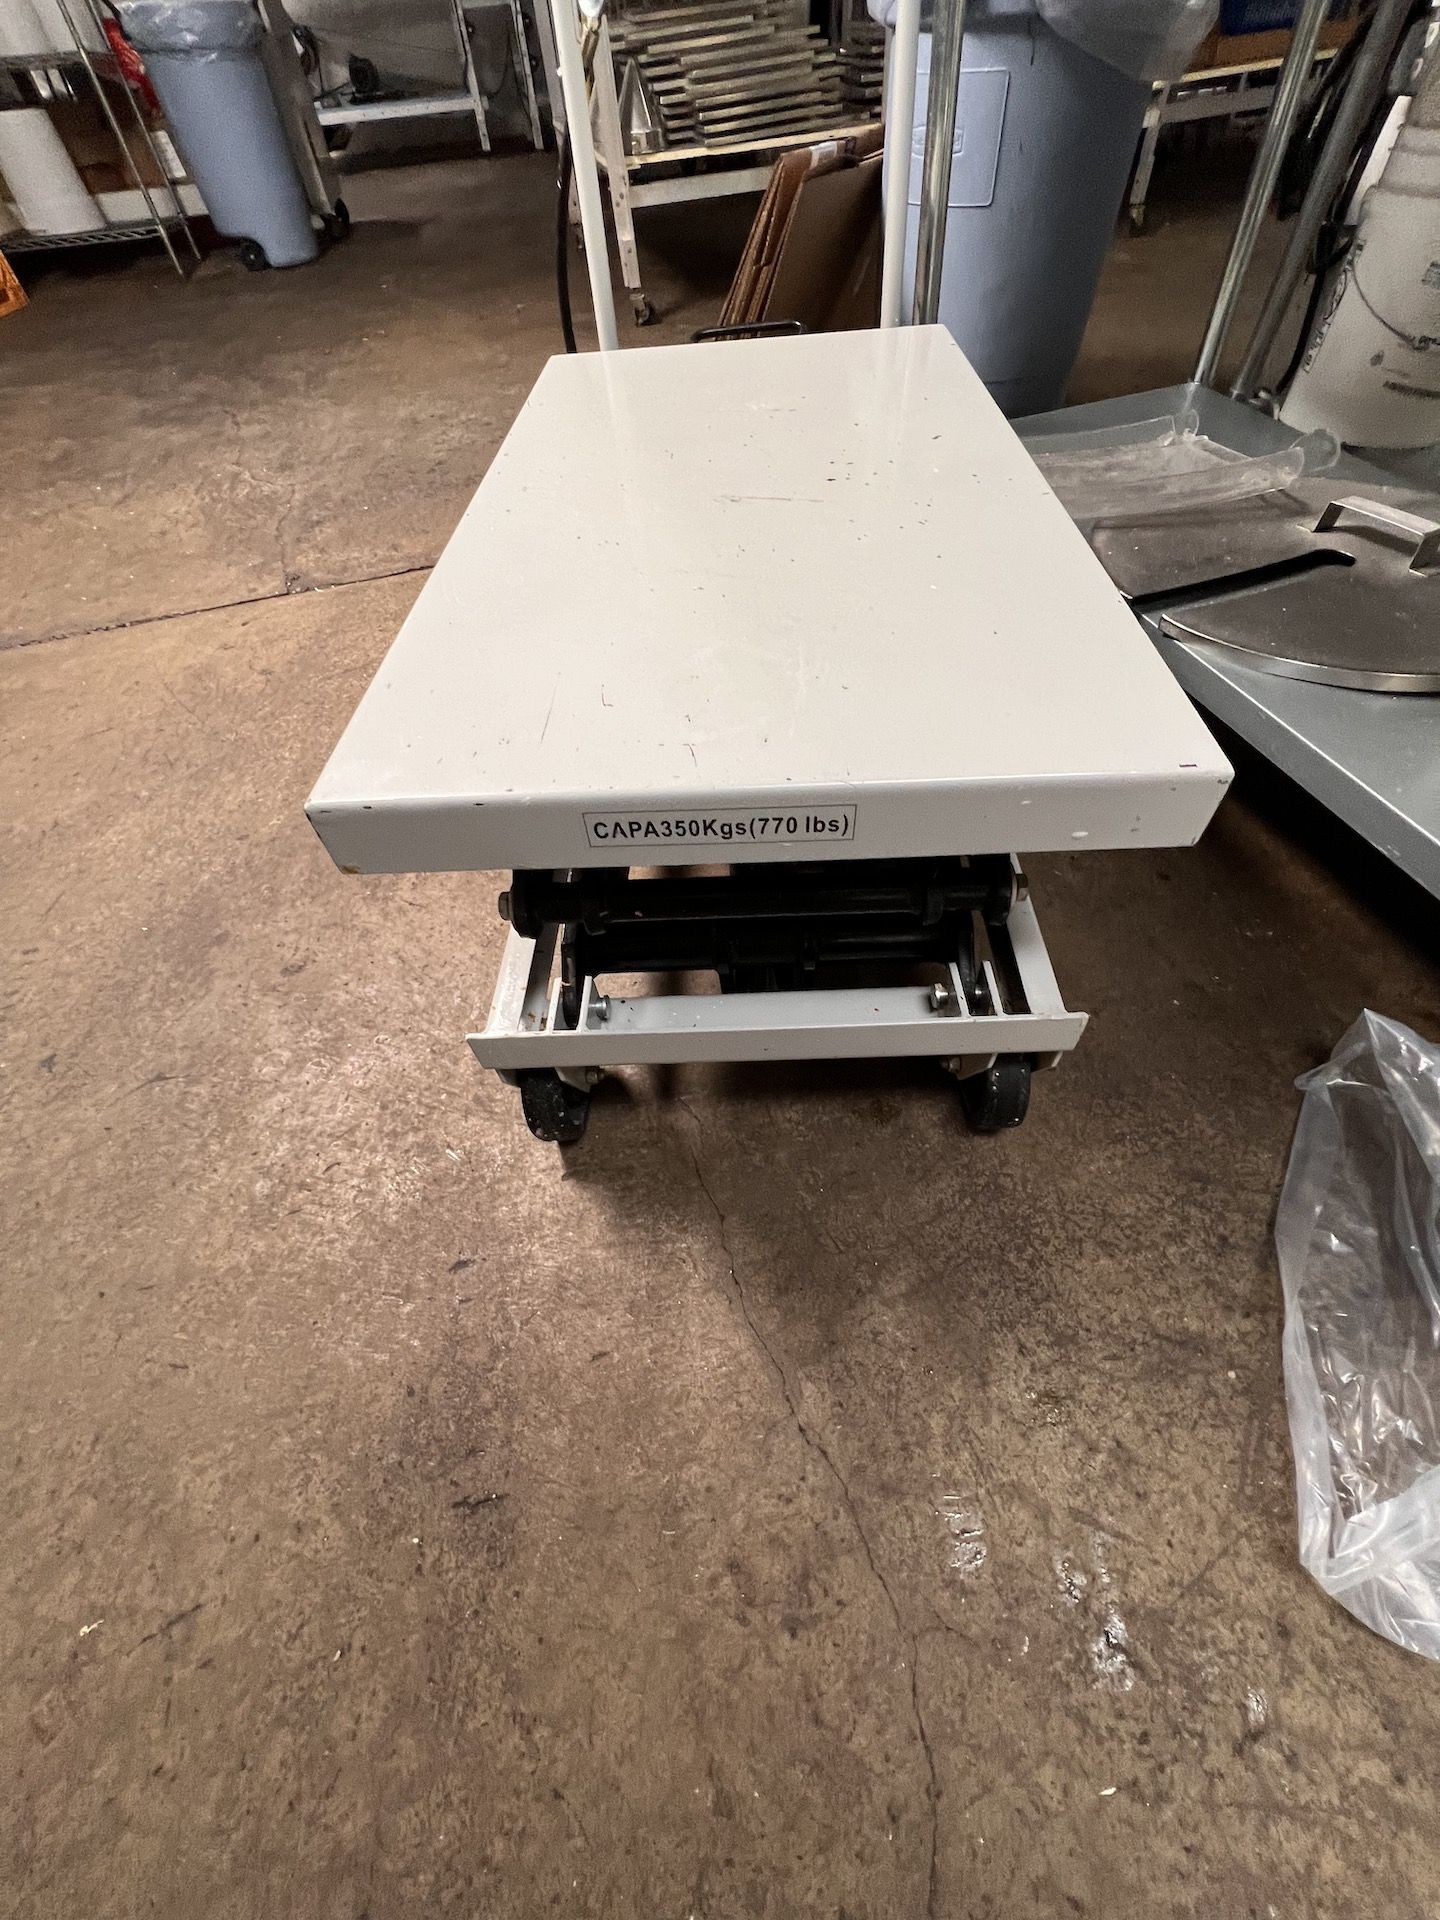 PORTABLE 770 LB PNEUMATIC LIFT TABLE WITH FOOT PEDAL, 116 PSI AIR PRESSURE, LIFTS TO APPROX. 36" - Image 2 of 5